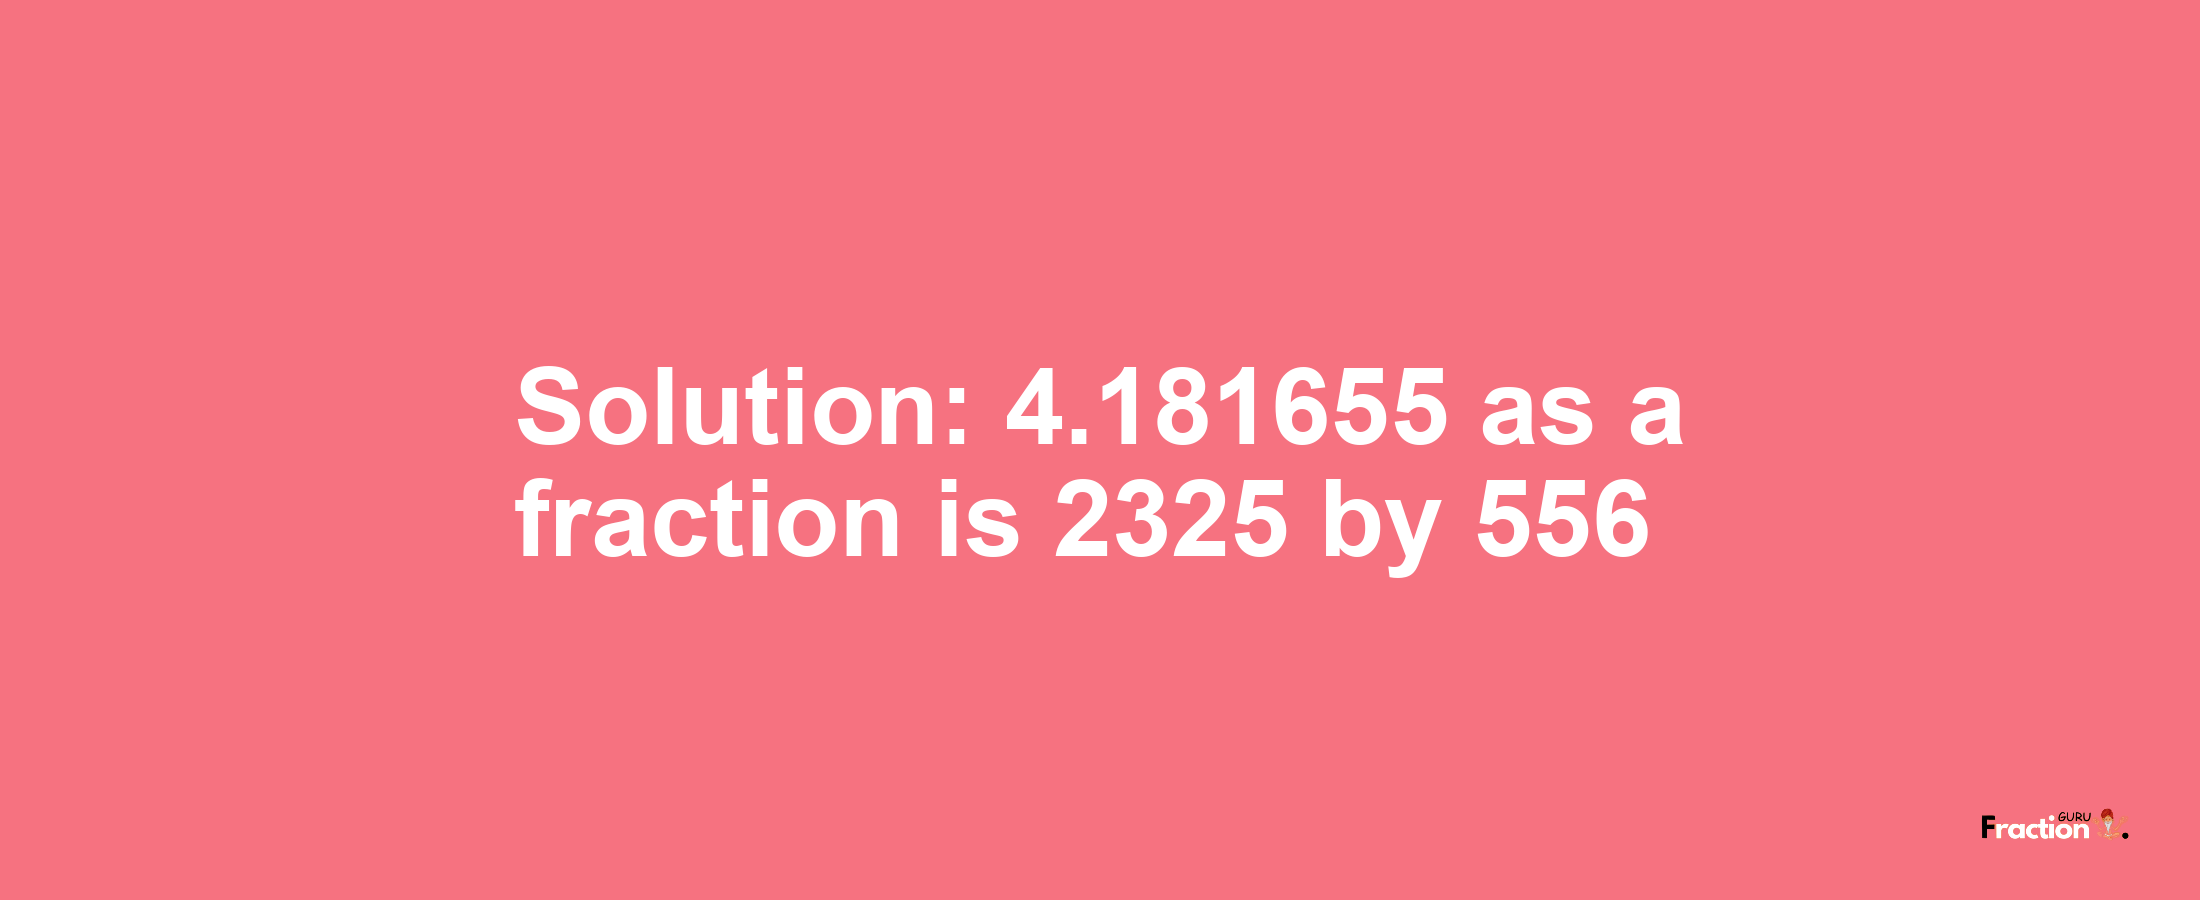 Solution:4.181655 as a fraction is 2325/556